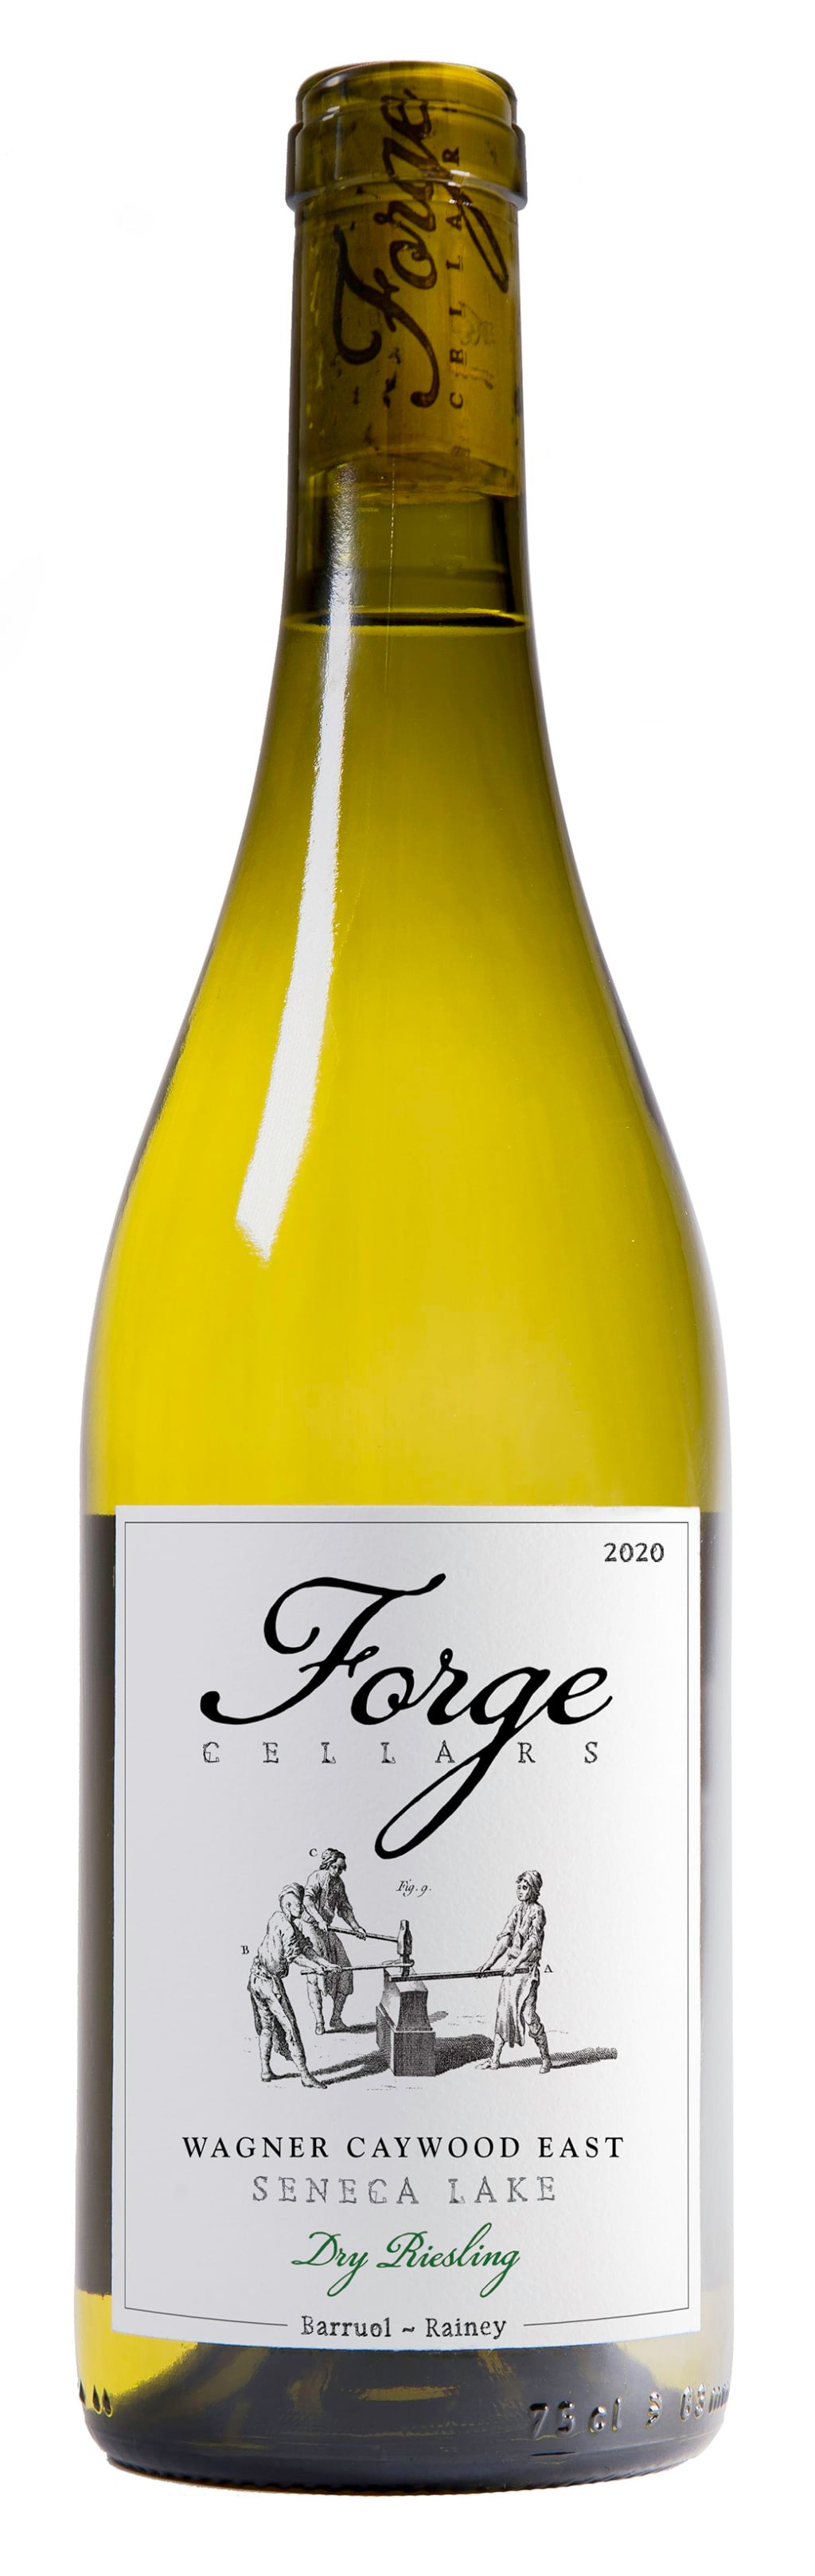 FORGE CELLARS RIESLING WAGNER CAYWOOD EAST